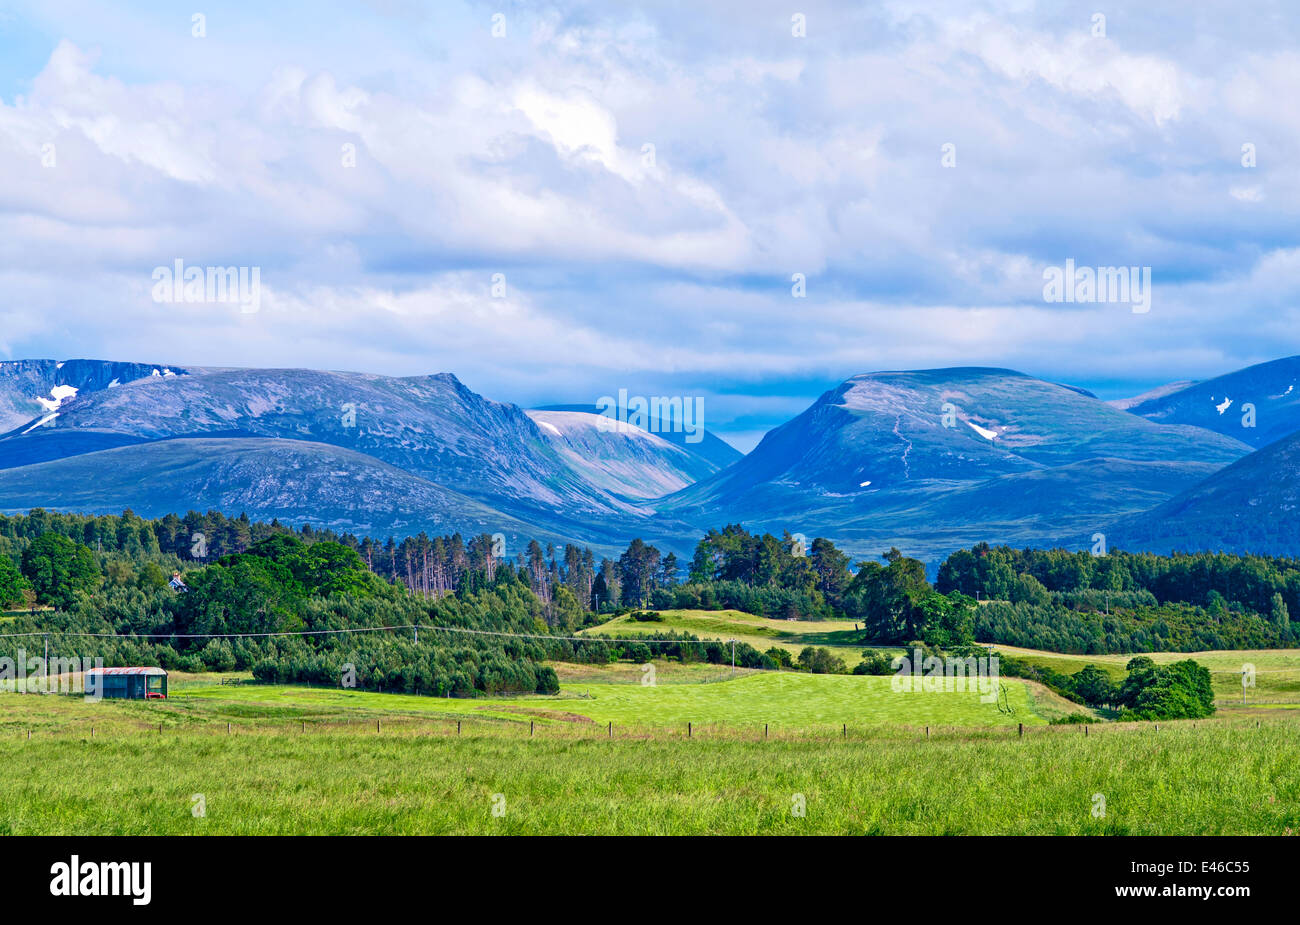 The Lairig Ghru mountain pass seen across farmland and forest on the Rothiemurchus estate, near Aviemore, Cairngorms, Scotland Stock Photo